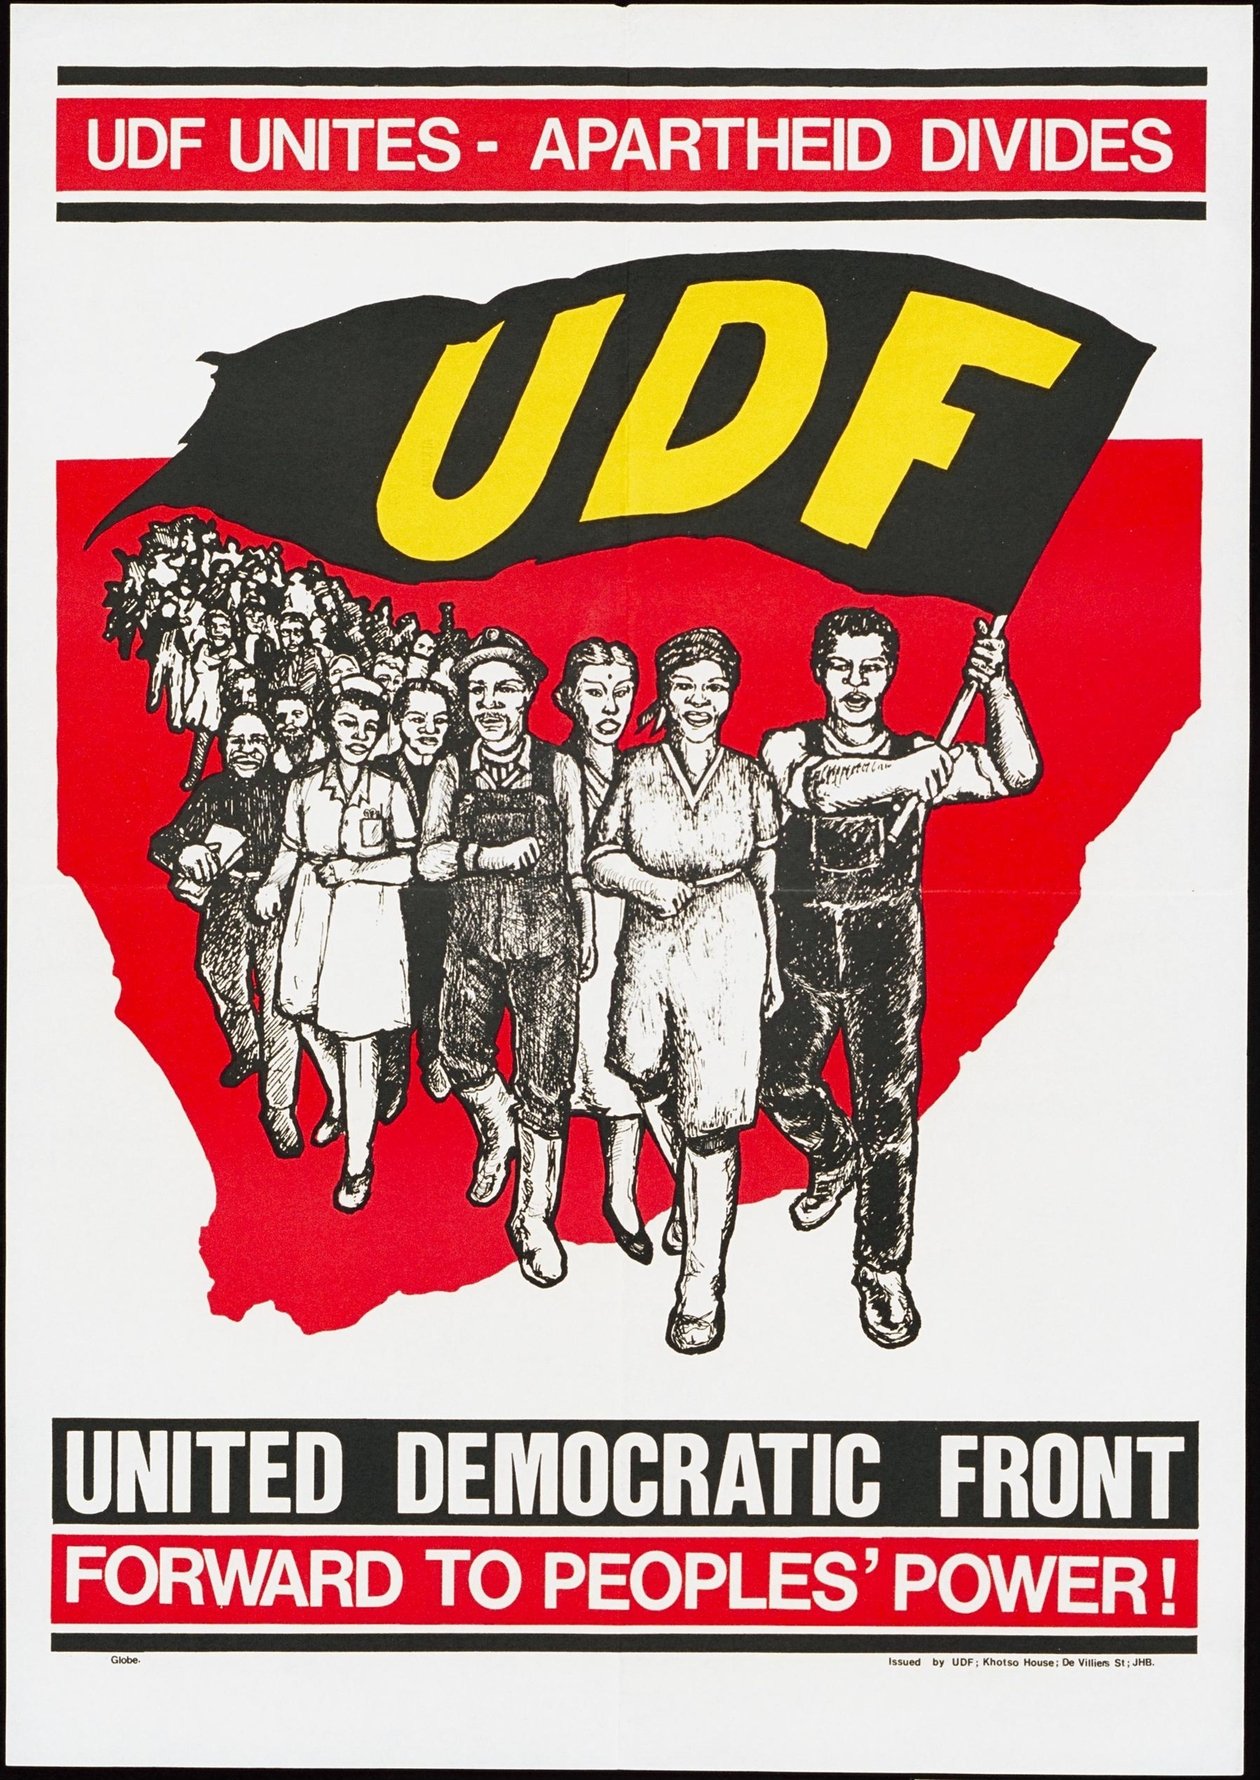 This iconic poster marked the UDF's launch in August 1983. Photo: Northwestern.